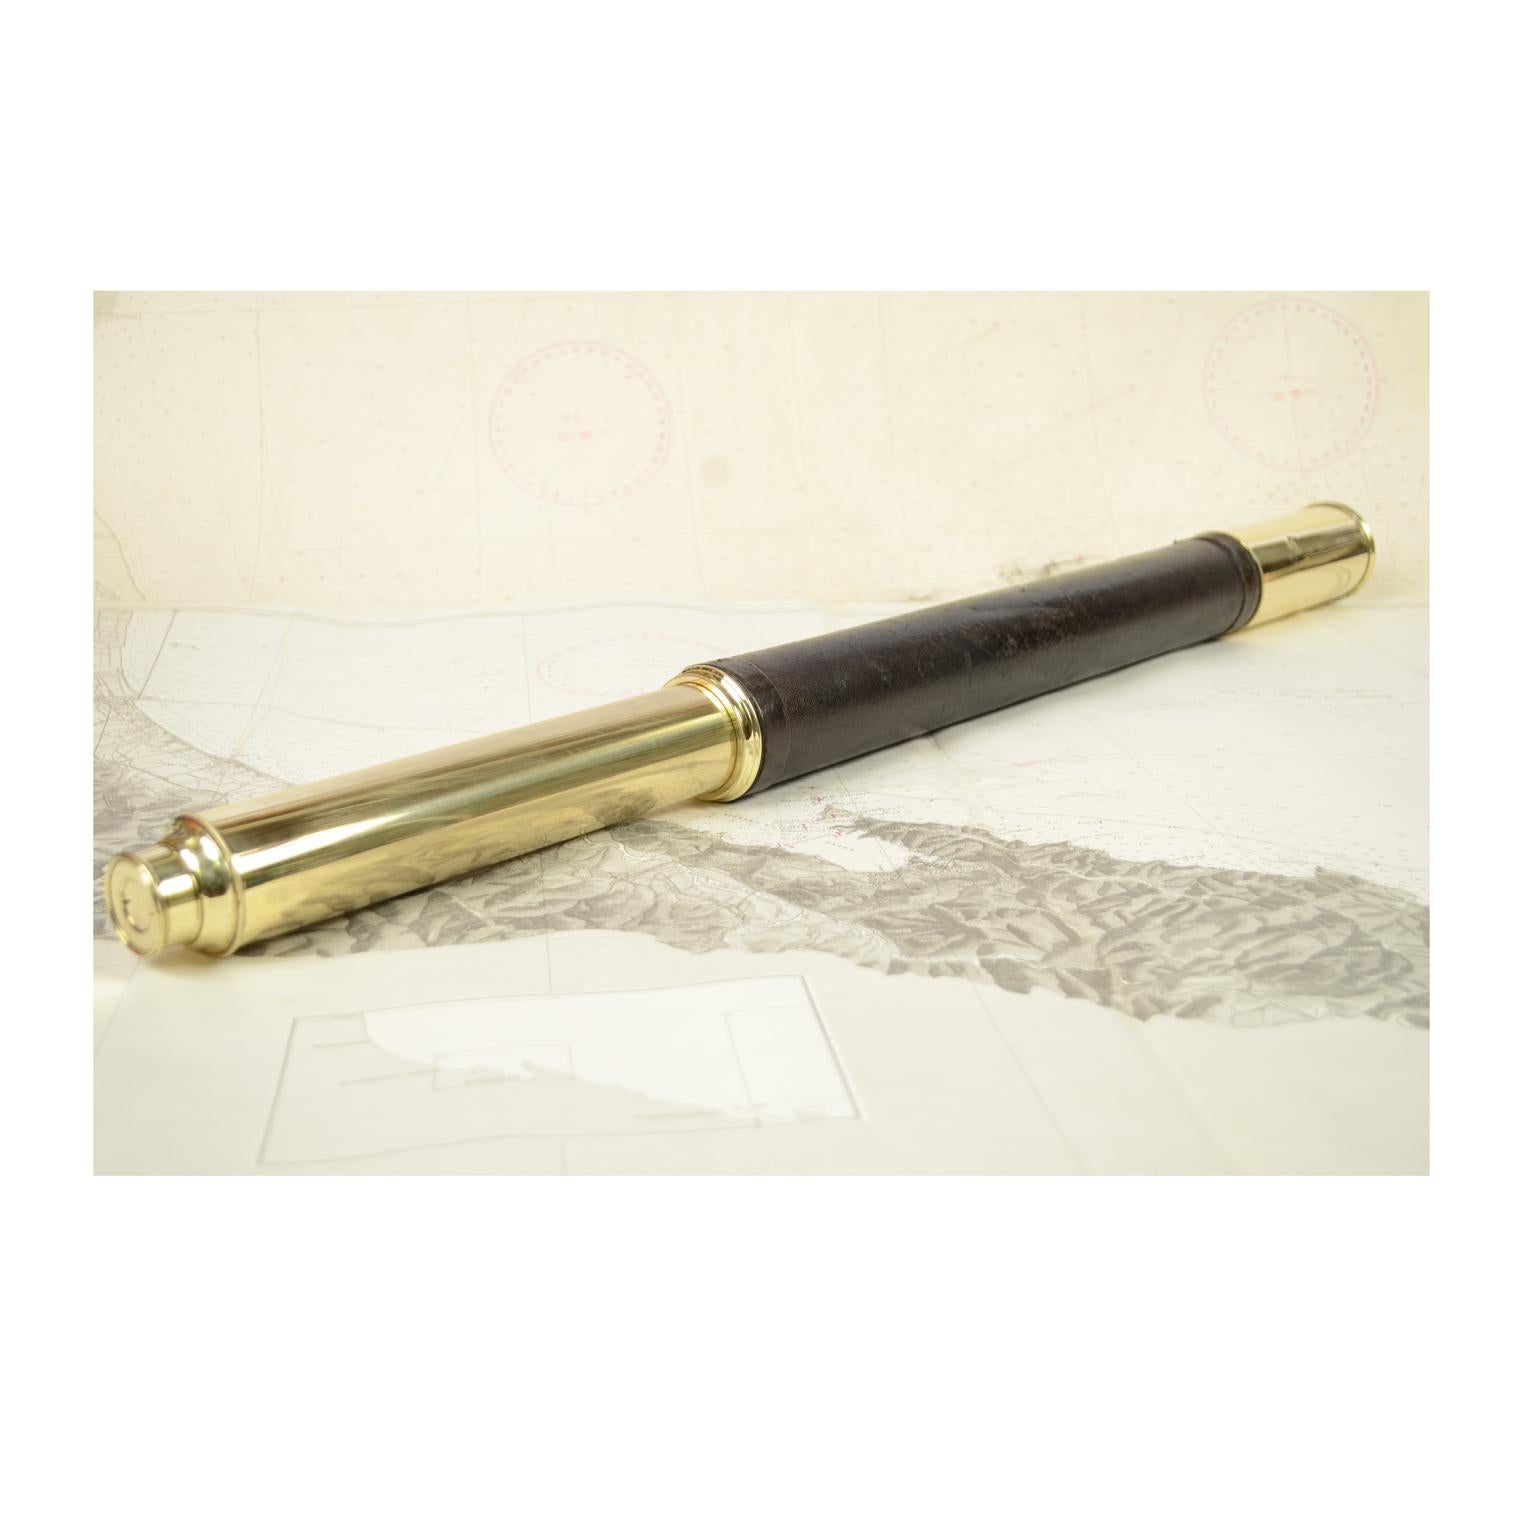 Large brass telescope with leather-covered handle. Focus on one extension, complete with sun visor extension and dust cover. English manufacture of the first half of the nineteenth century. Maximum length 116 cm, minimum 60 cm, focal diameter 6 cm.